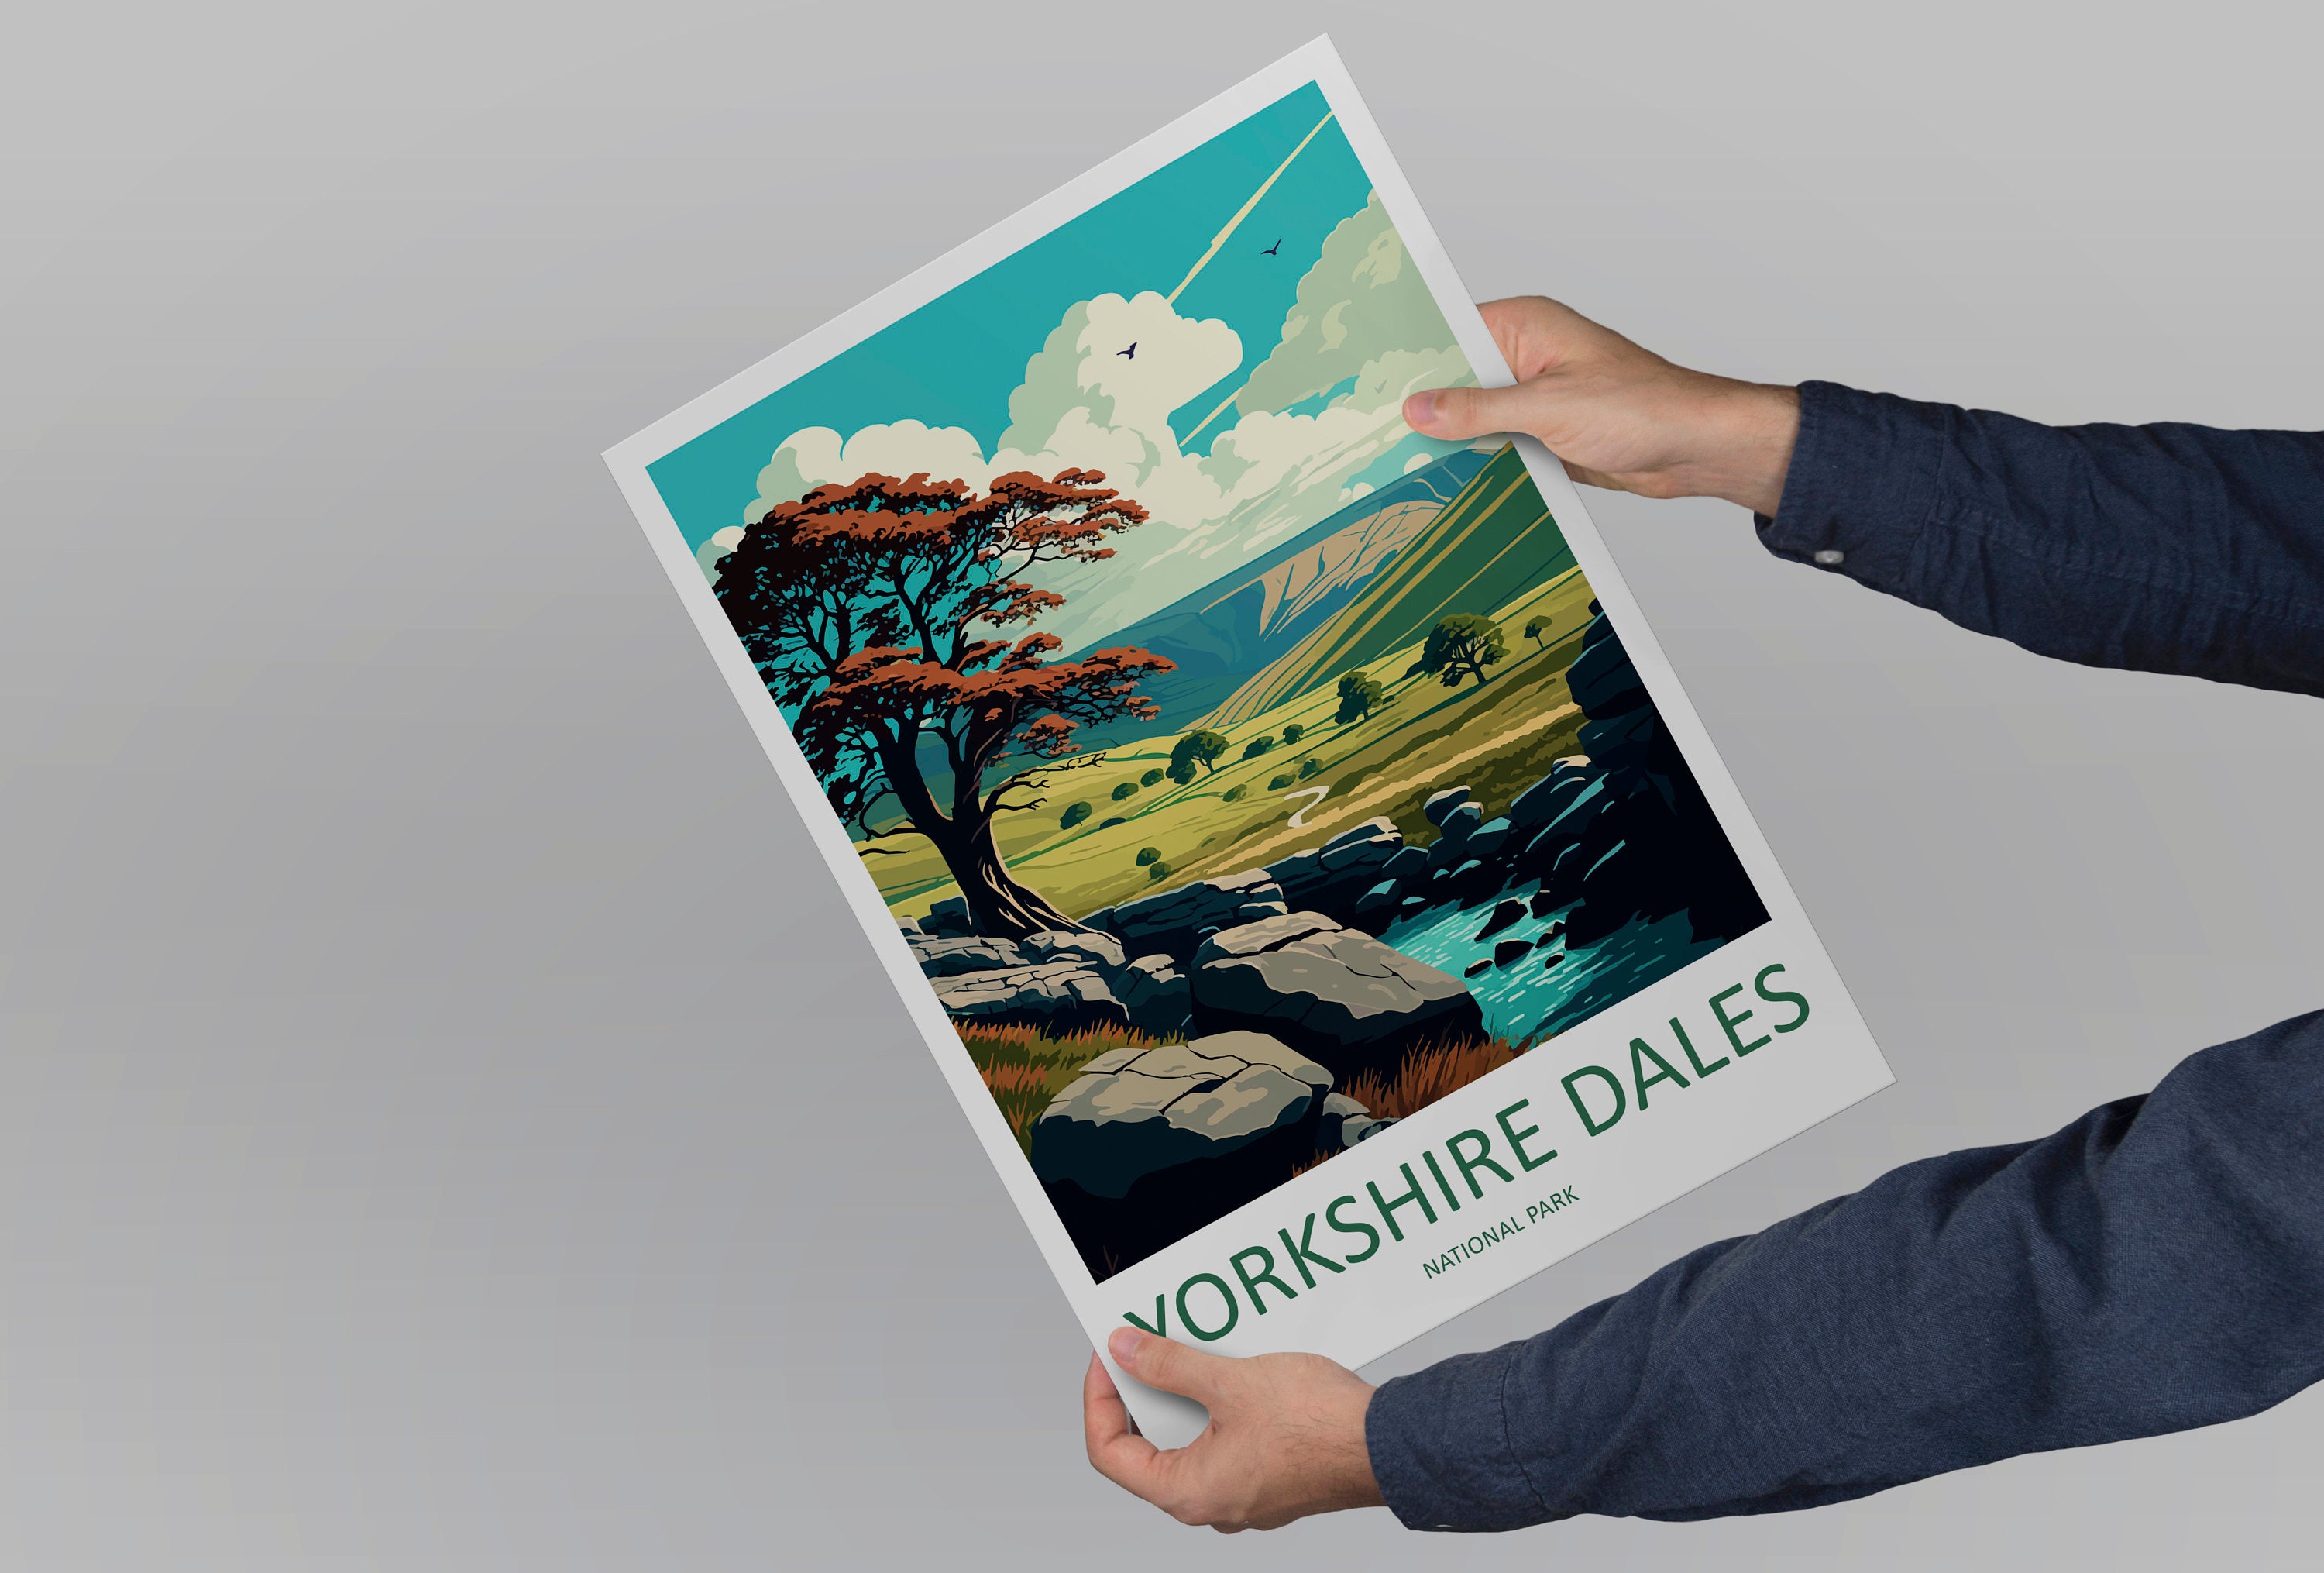 Yorkshire Dales Travel Print Wall Art Yorkshire Dales Wall Hanging Home Decor National Park Gift Yorkshire Dales Lovers National Park Wall